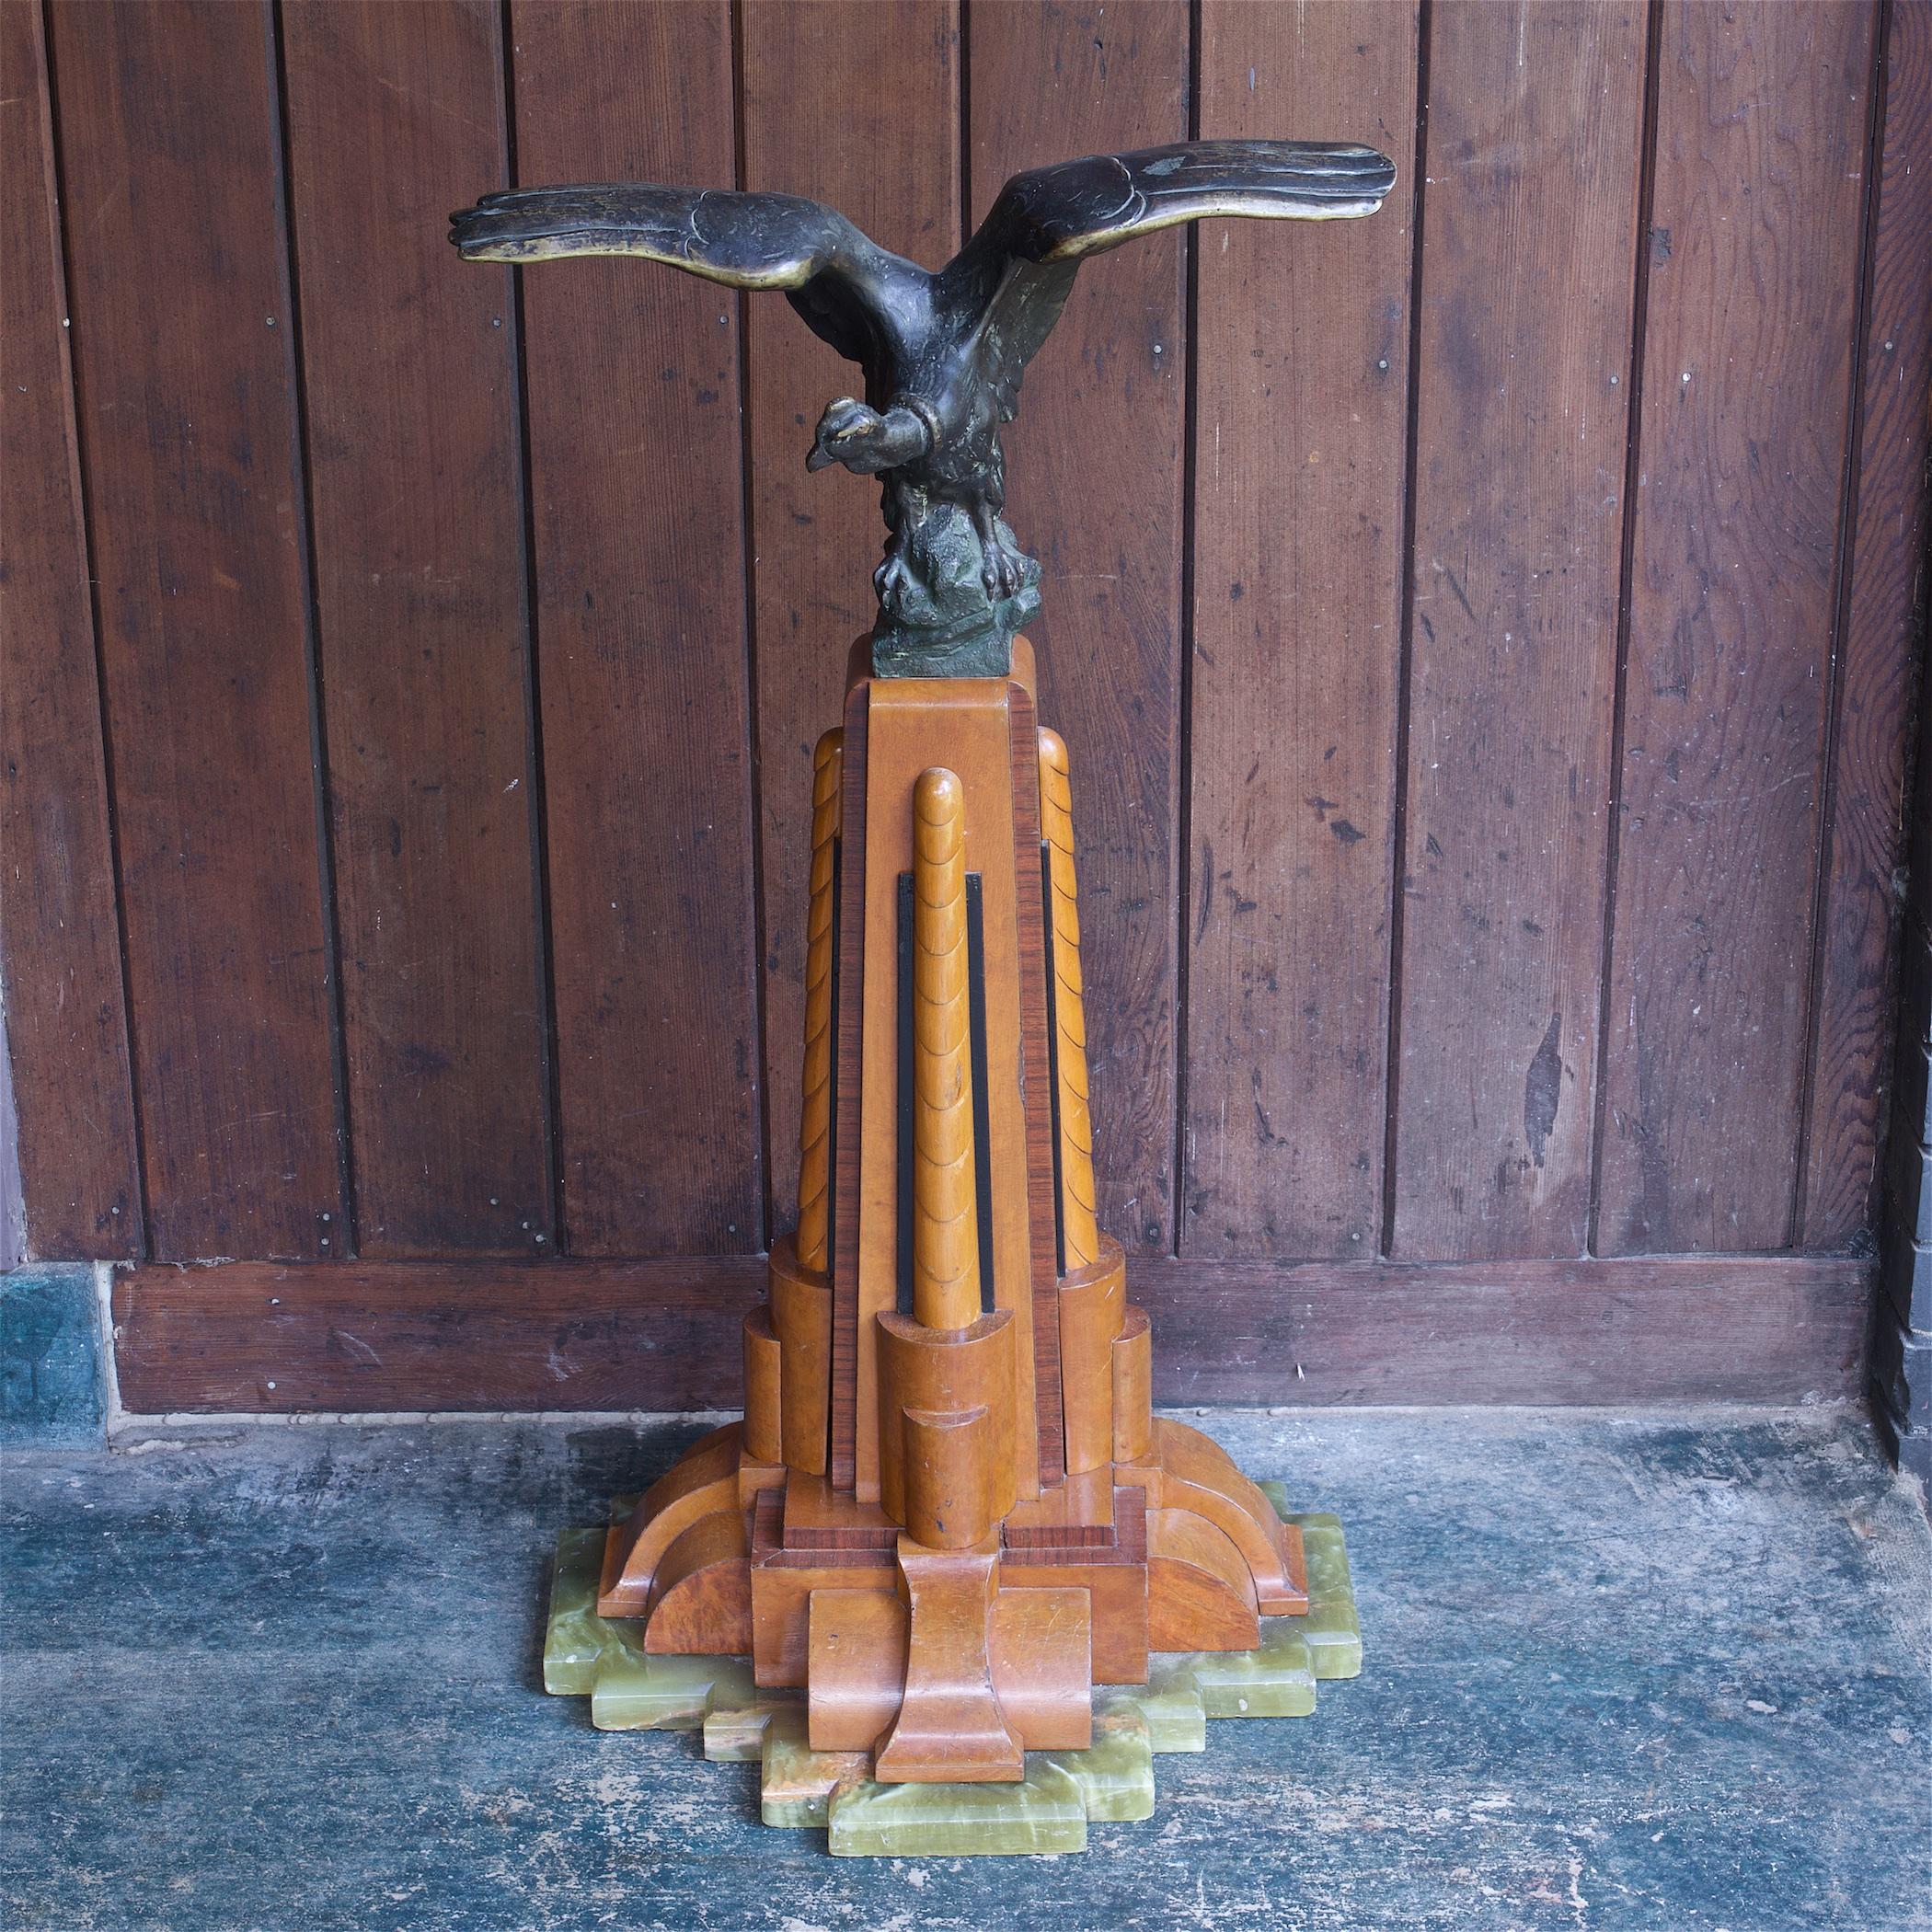 Previous owner mentioned that this was a maquette for a building design to be built or was built in Chicago. I found no references to a condor building or information about this condor sculpture. Artist remains unknown to us, it is numbered and